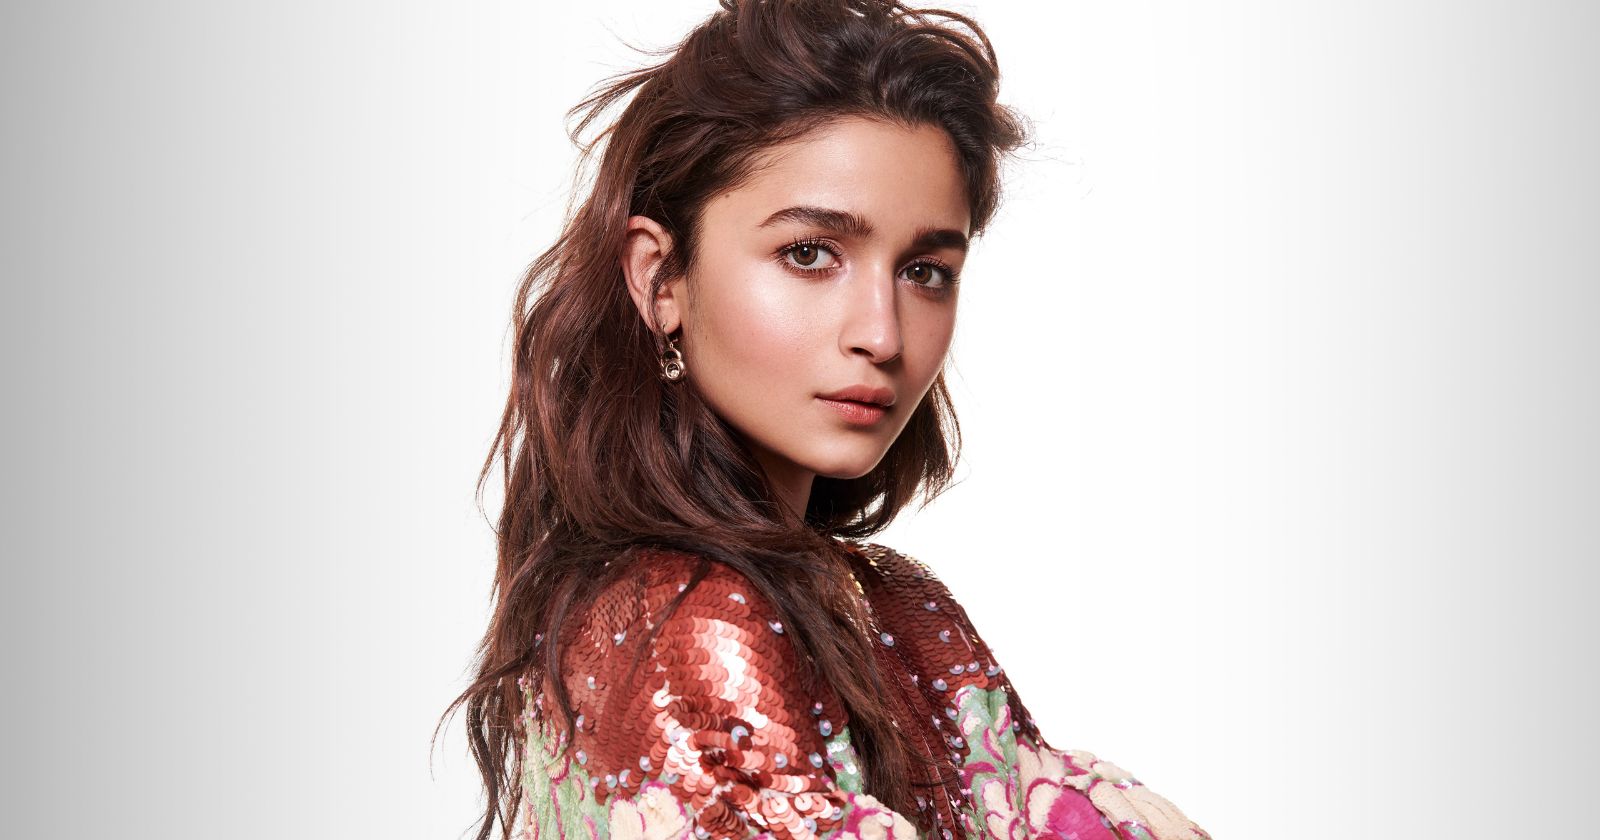 How to Recreate Alia Bhatt’s Hairstyles Using Hair Extensions